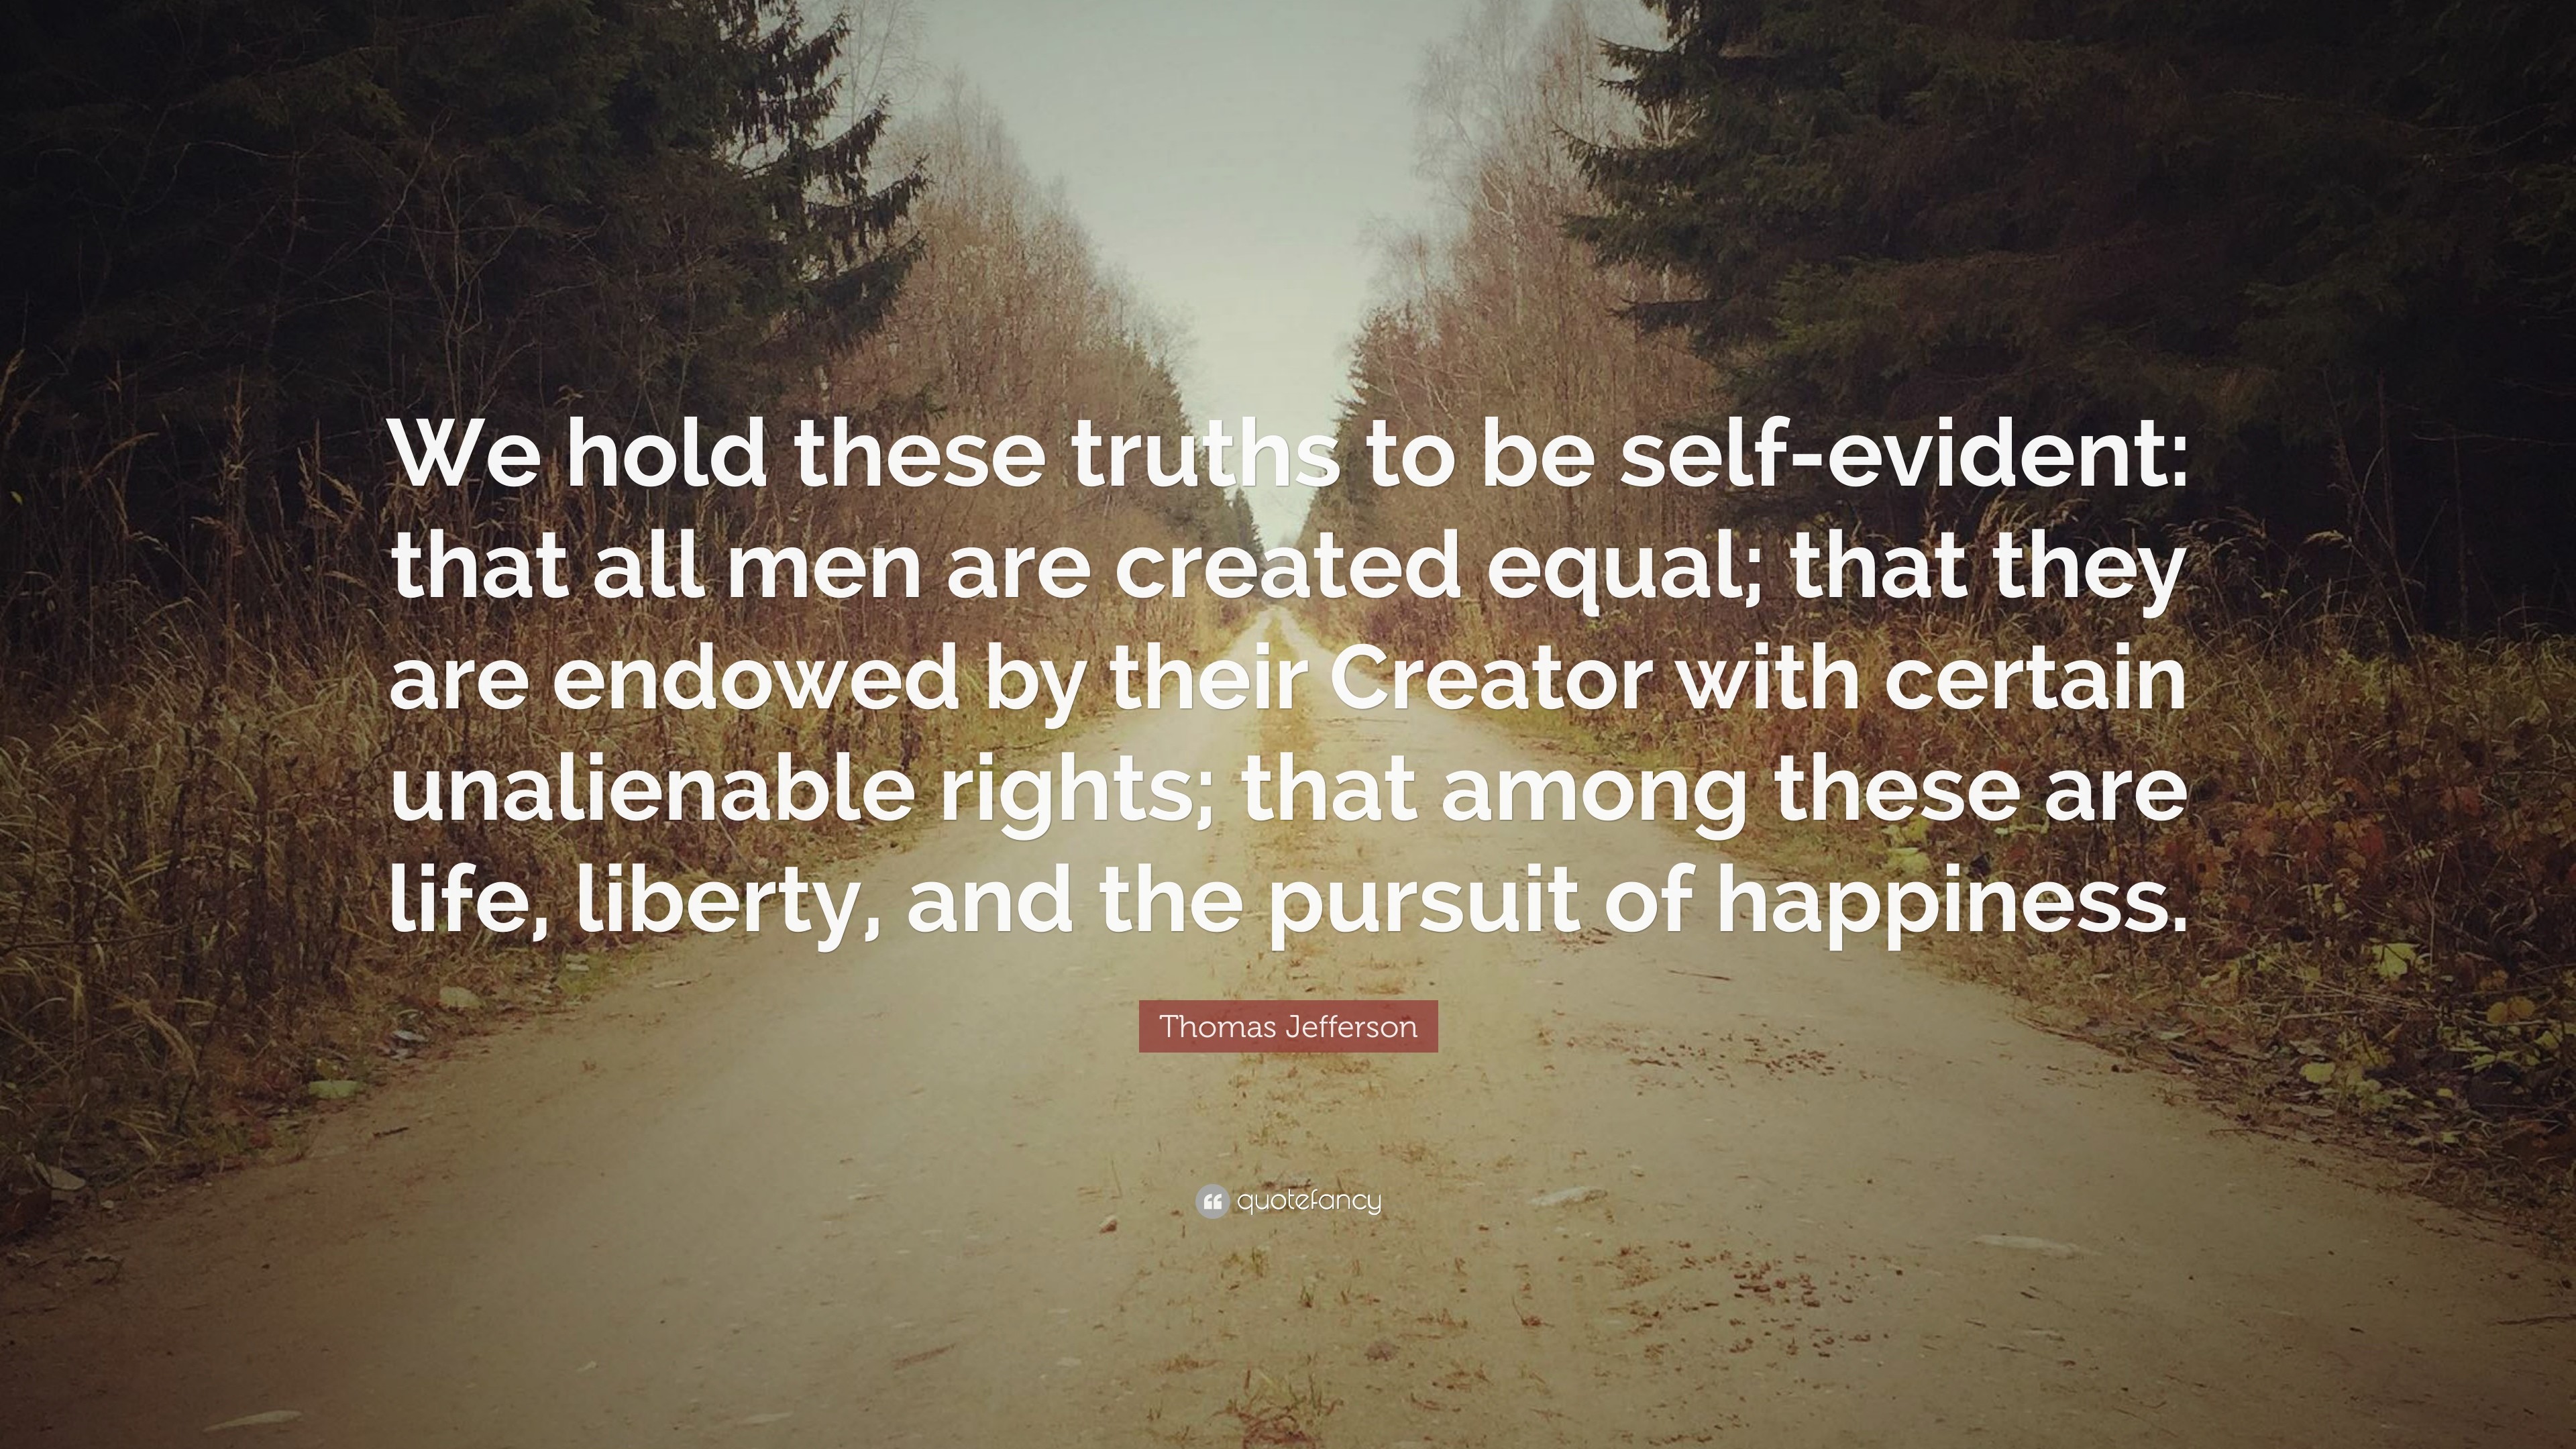 3840x2160 Thomas Jefferson Quote: “We hold these truths to be self-evident: that